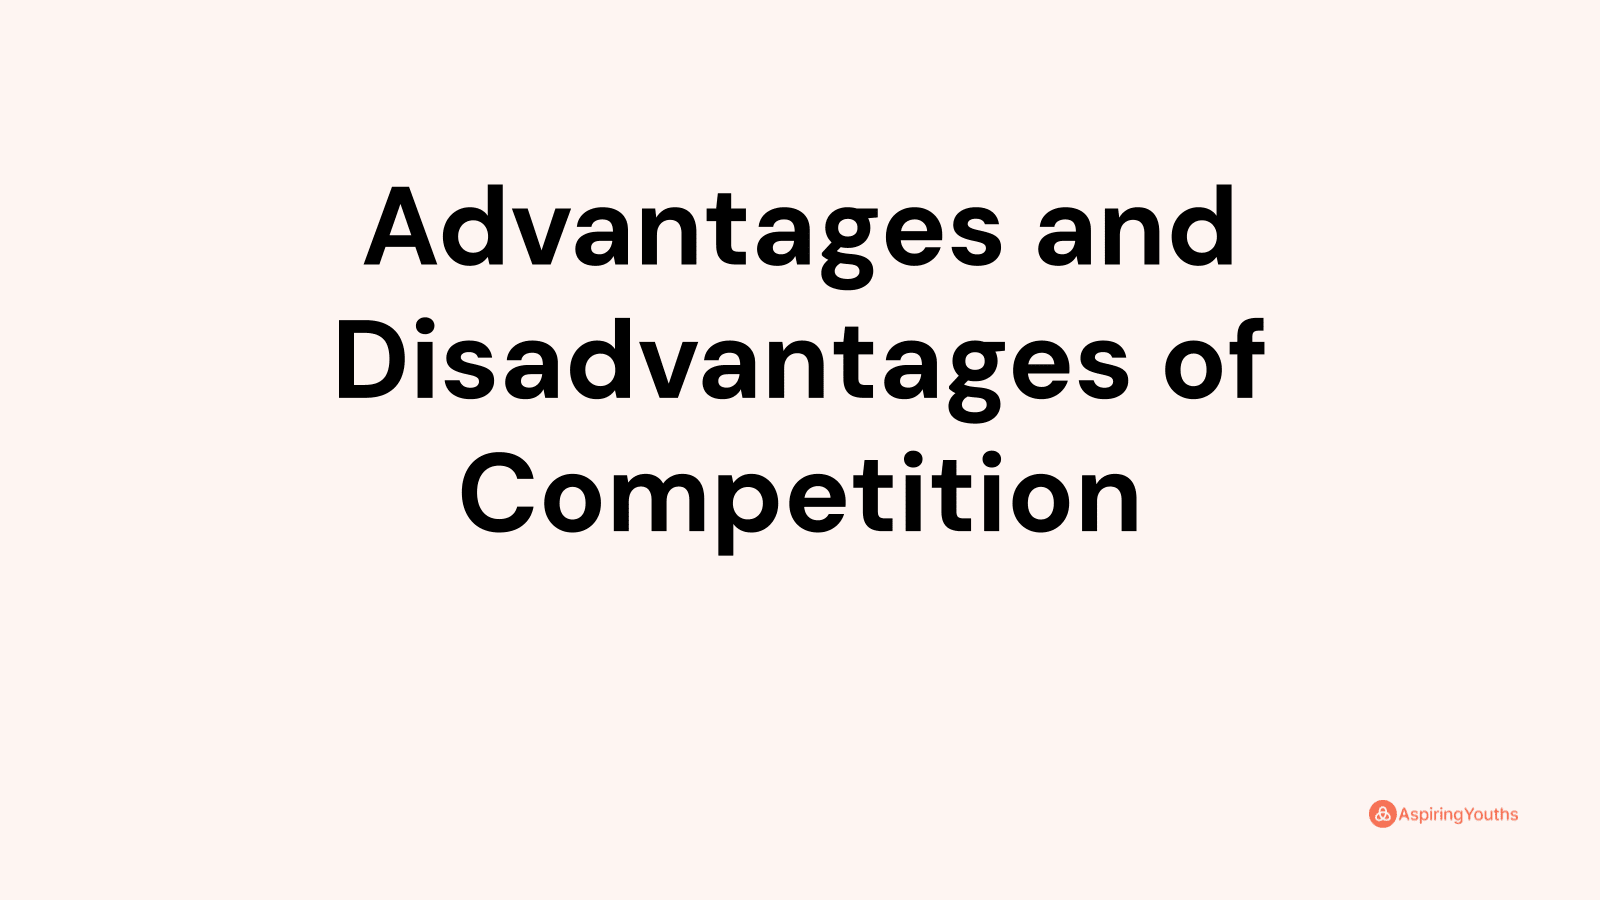 Advantages and disadvantages of Competition